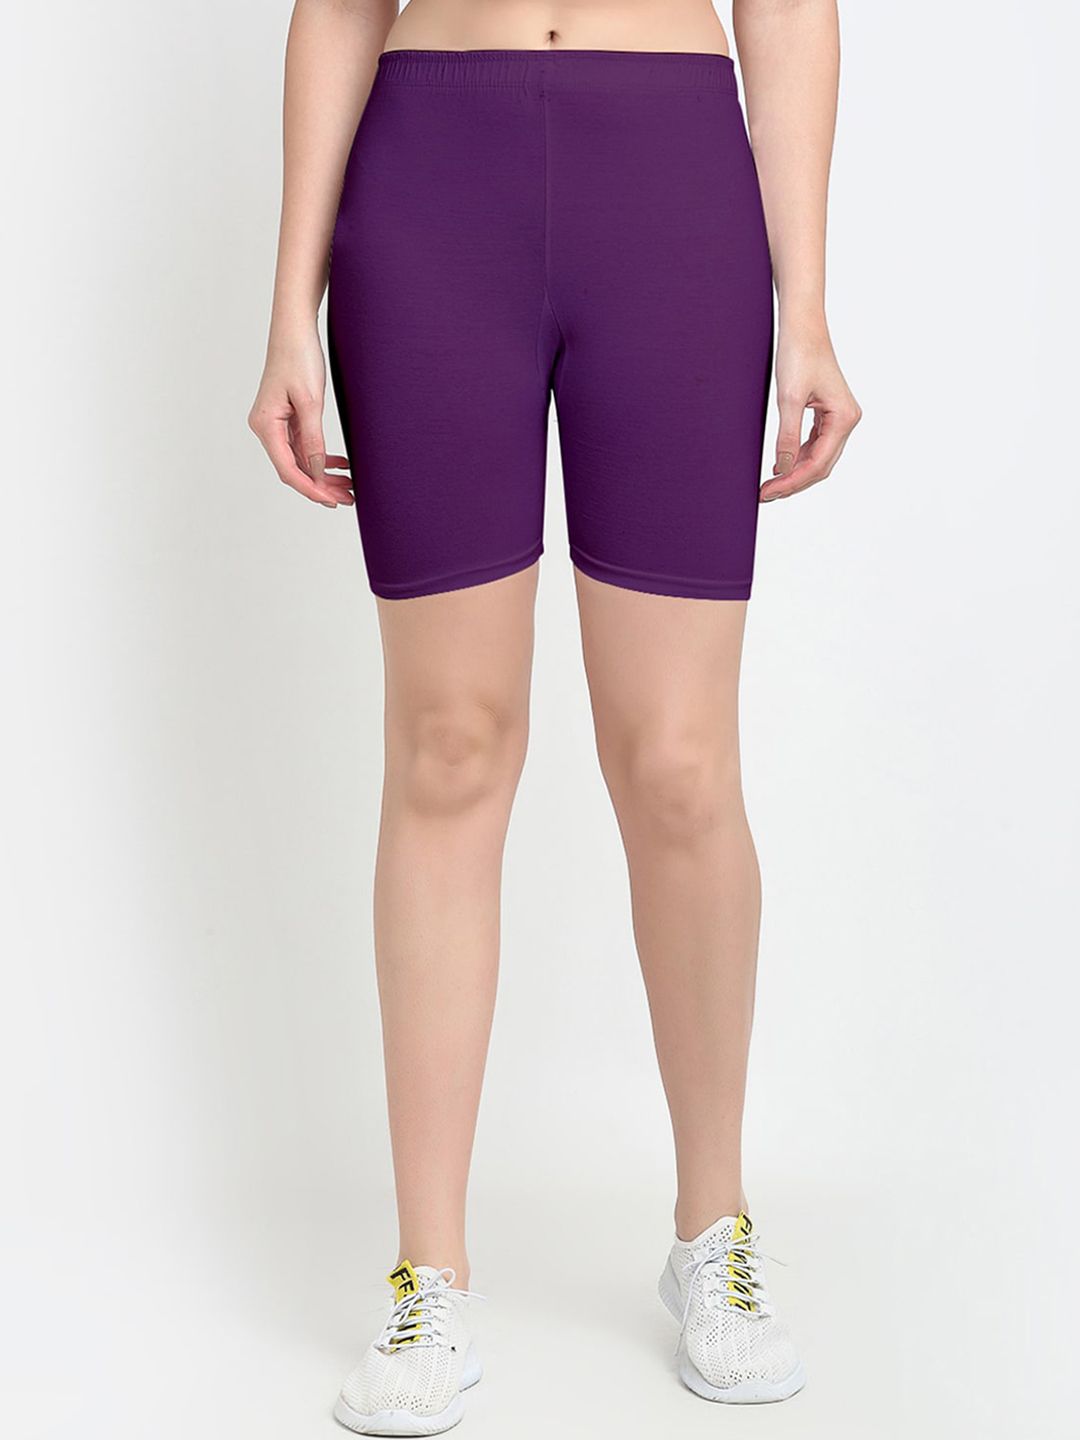 GRACIT Women Purple Cycling Sports Short Price in India